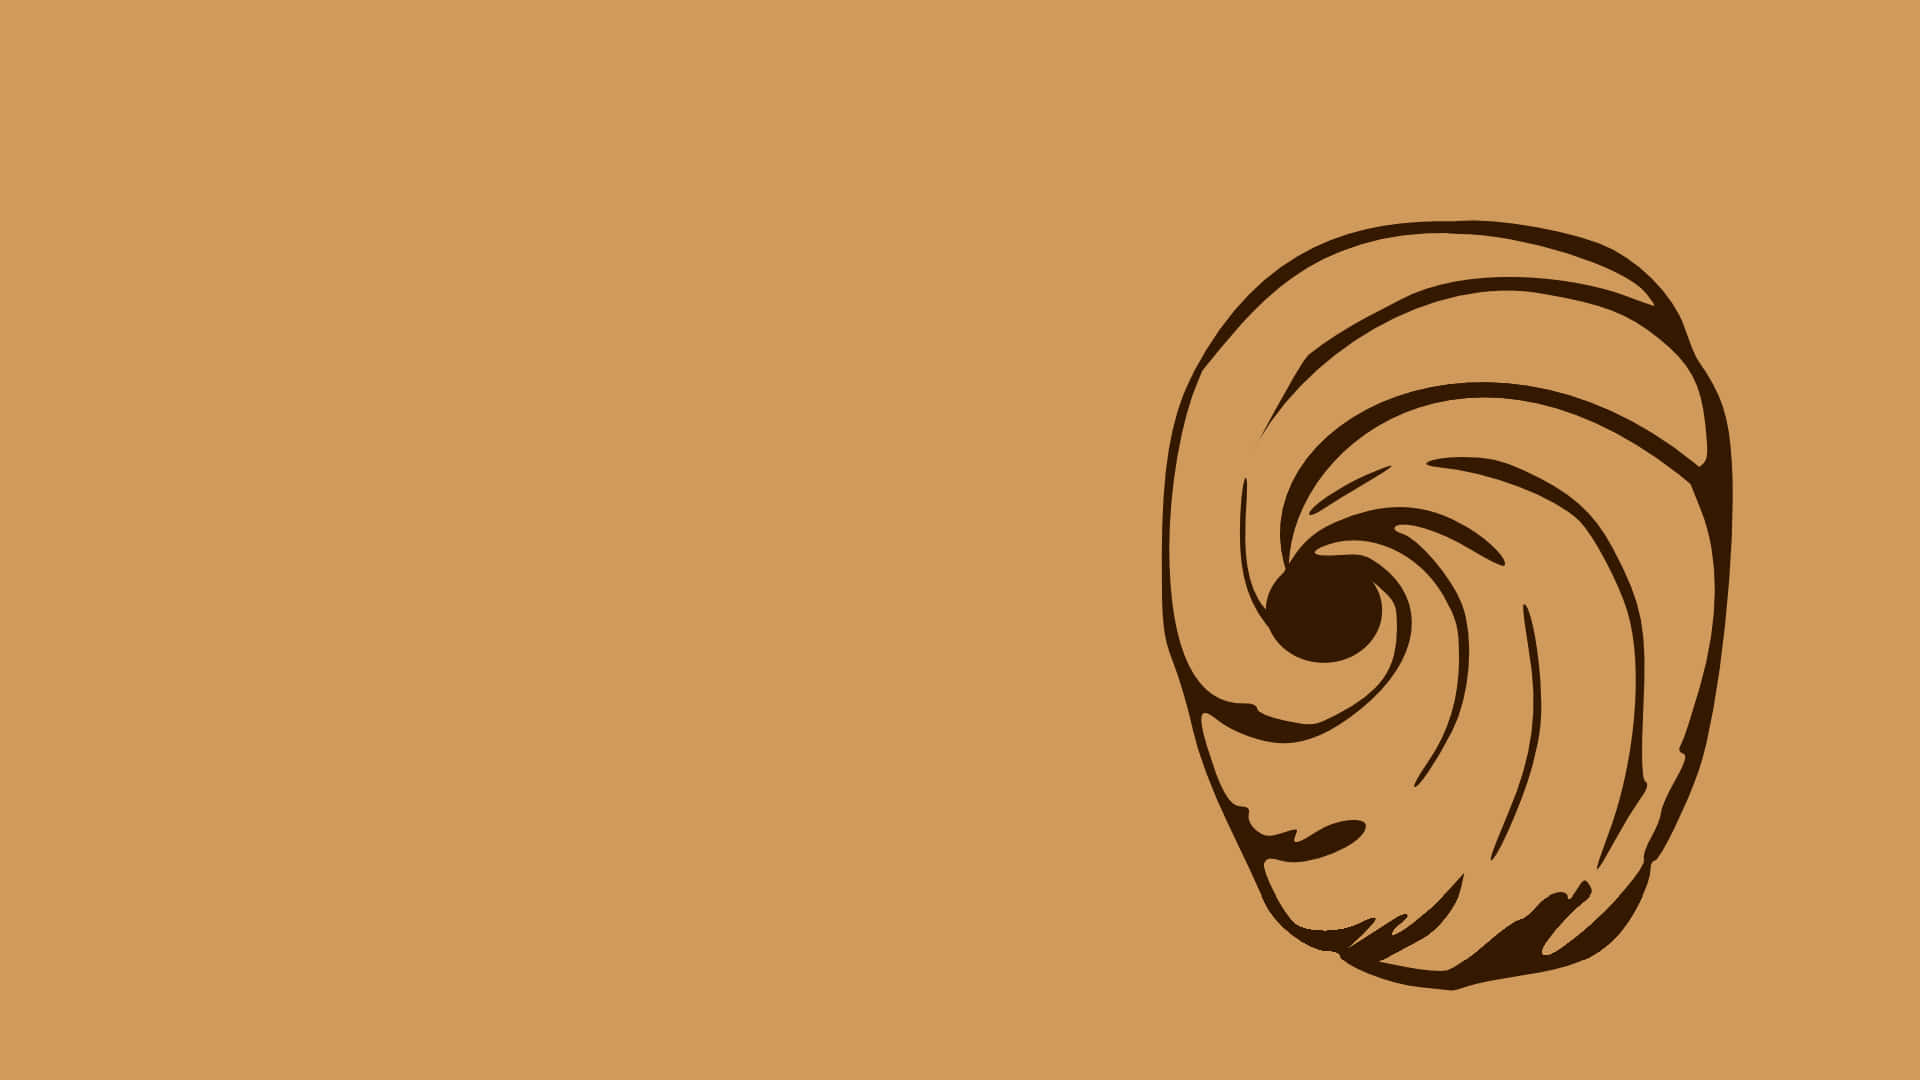 "A unique and stylish spin on an ancient Japanese mask, the Tobi Mask" Wallpaper